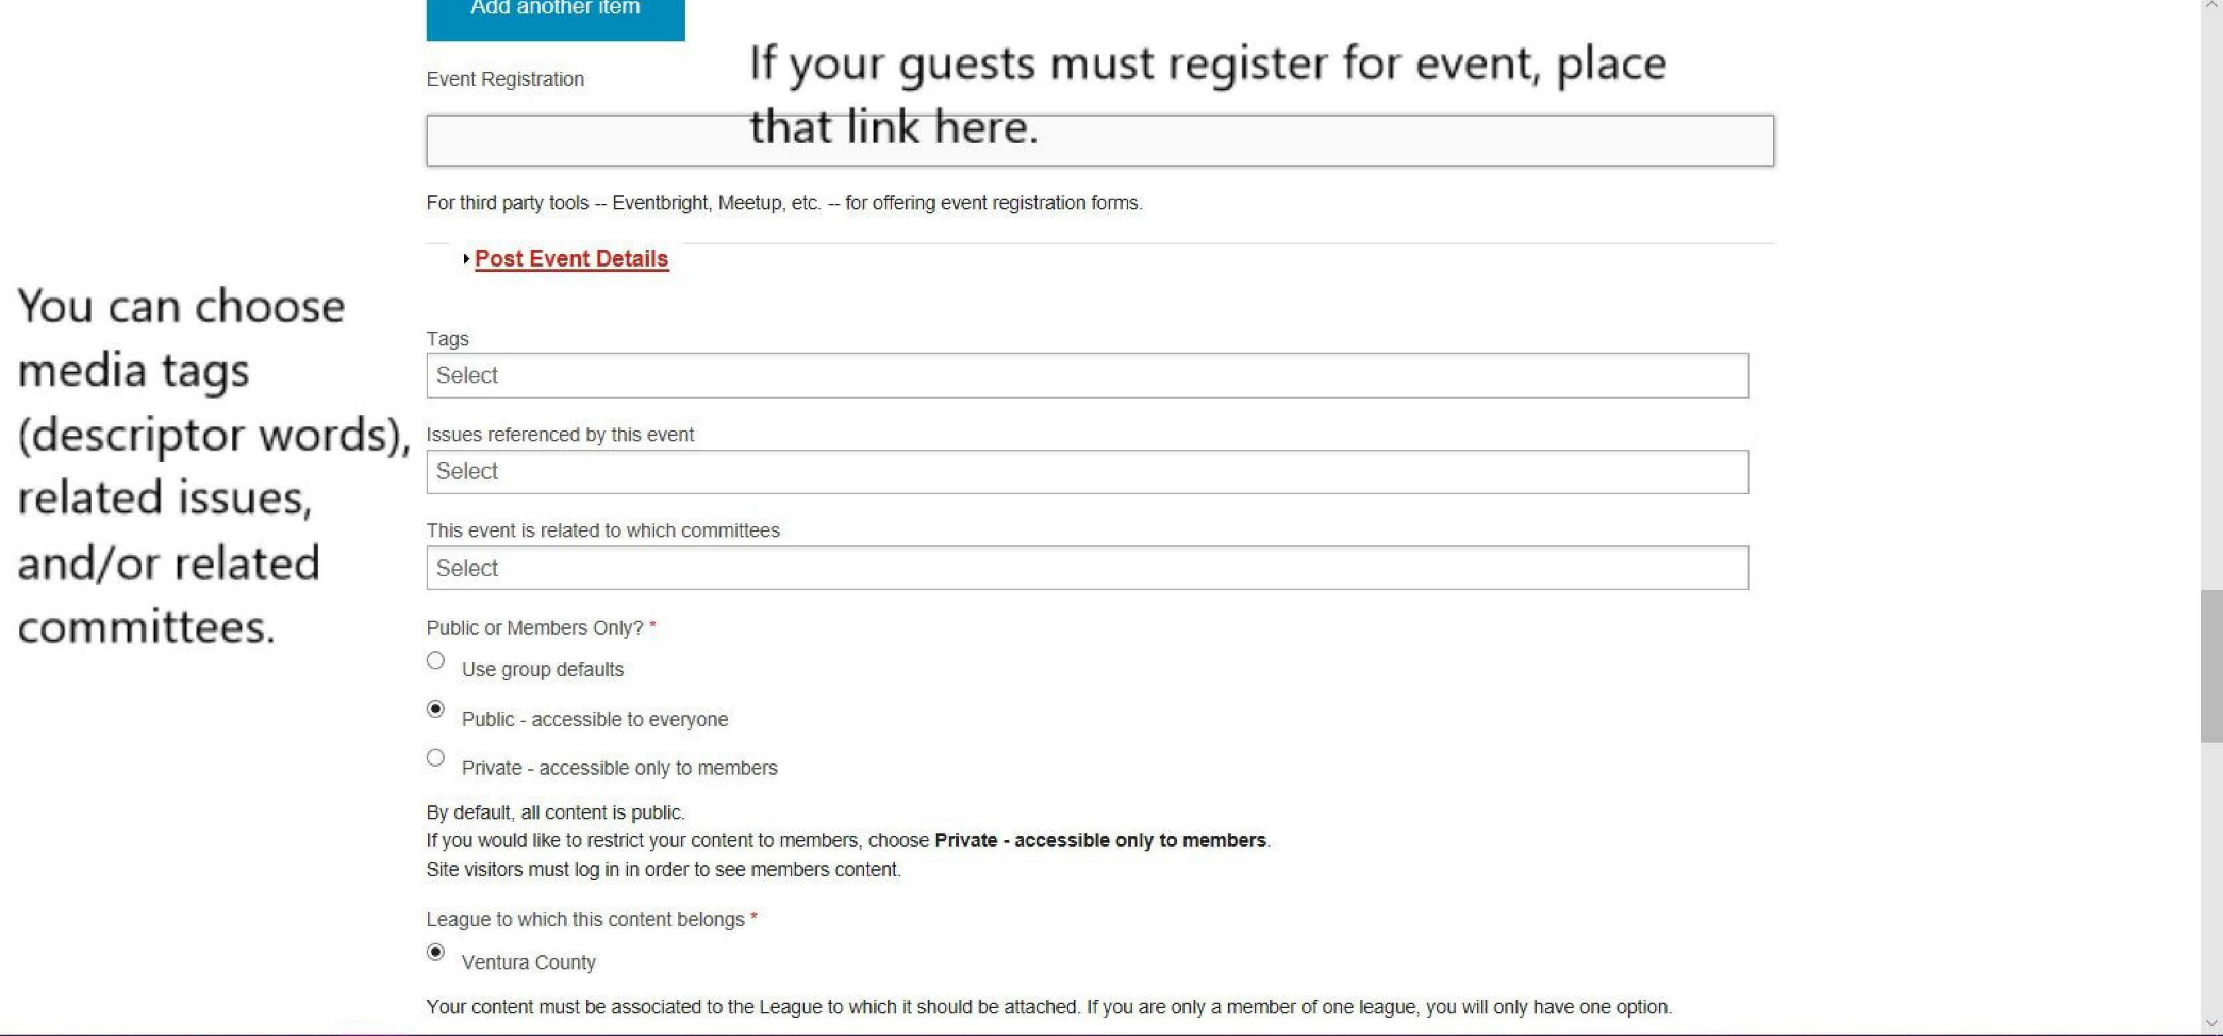 Add Event - add registration link, media tags, related issues and/or committees